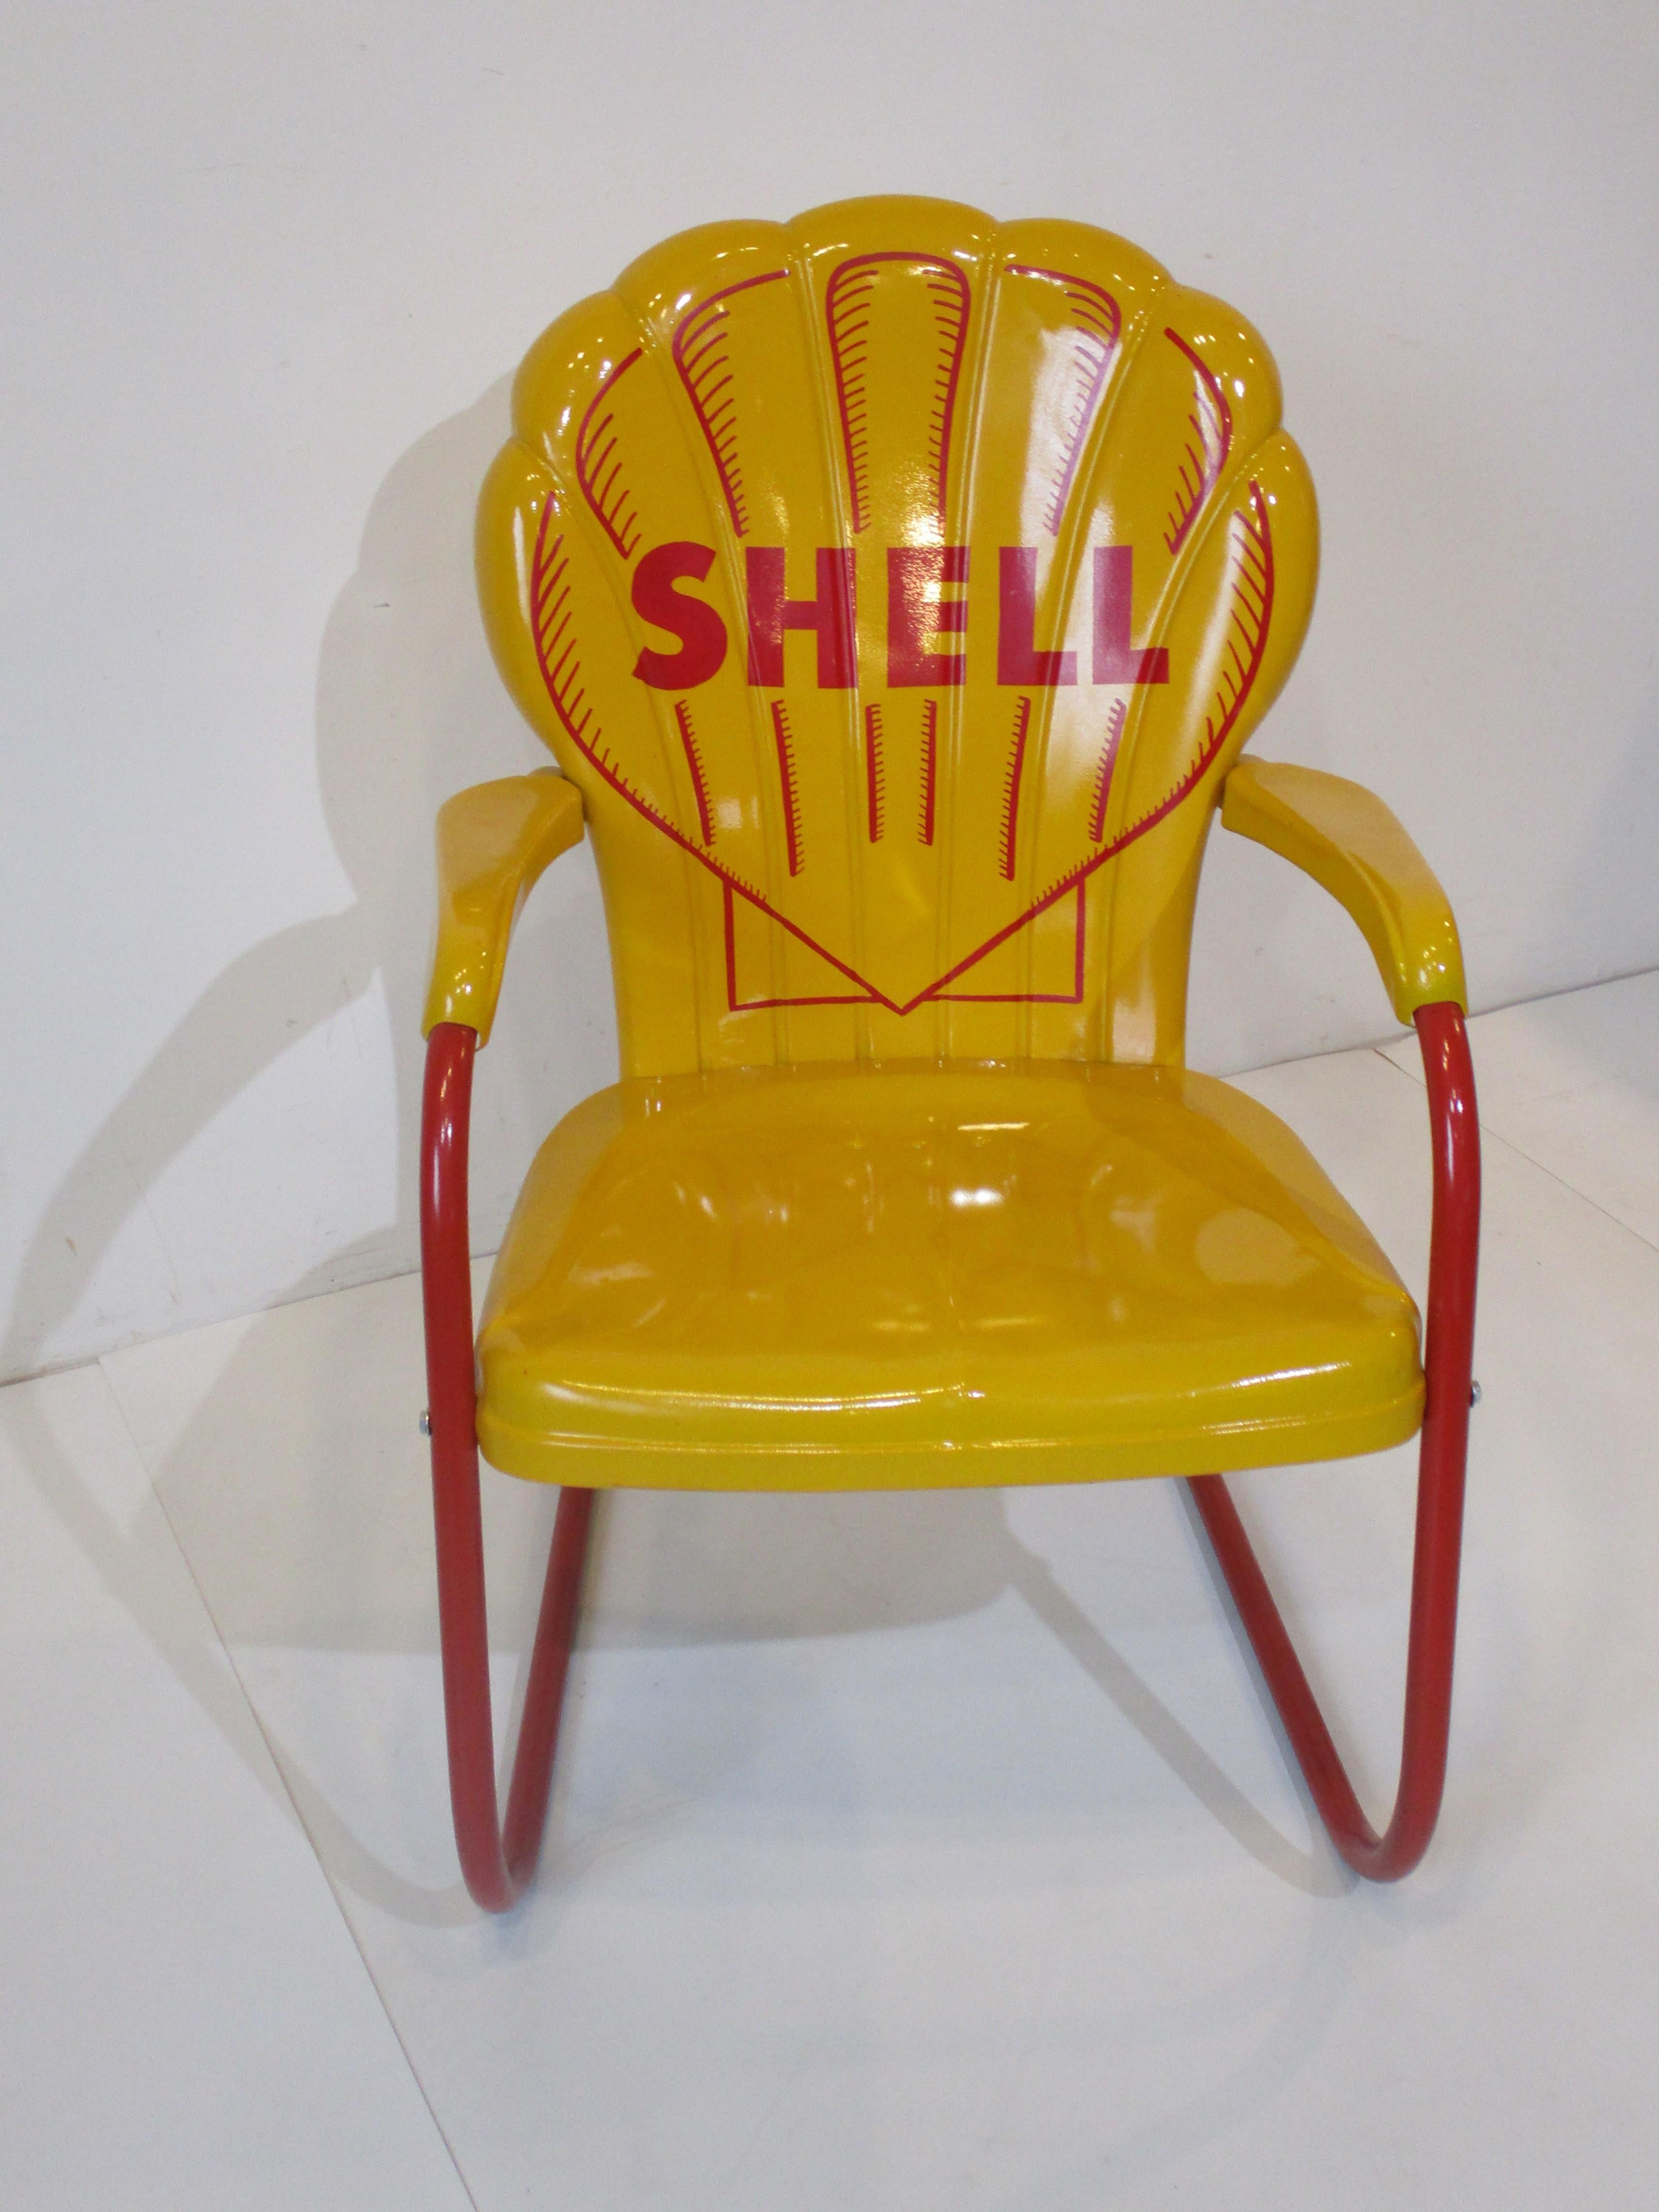 A petroliana vintage Mid Century pressed metal arm chair with hand painted Shell oil company logo . The script is on the front back rest of the chair with scalloped top edge in the style of a shell done in the companies yellow and red colors . The